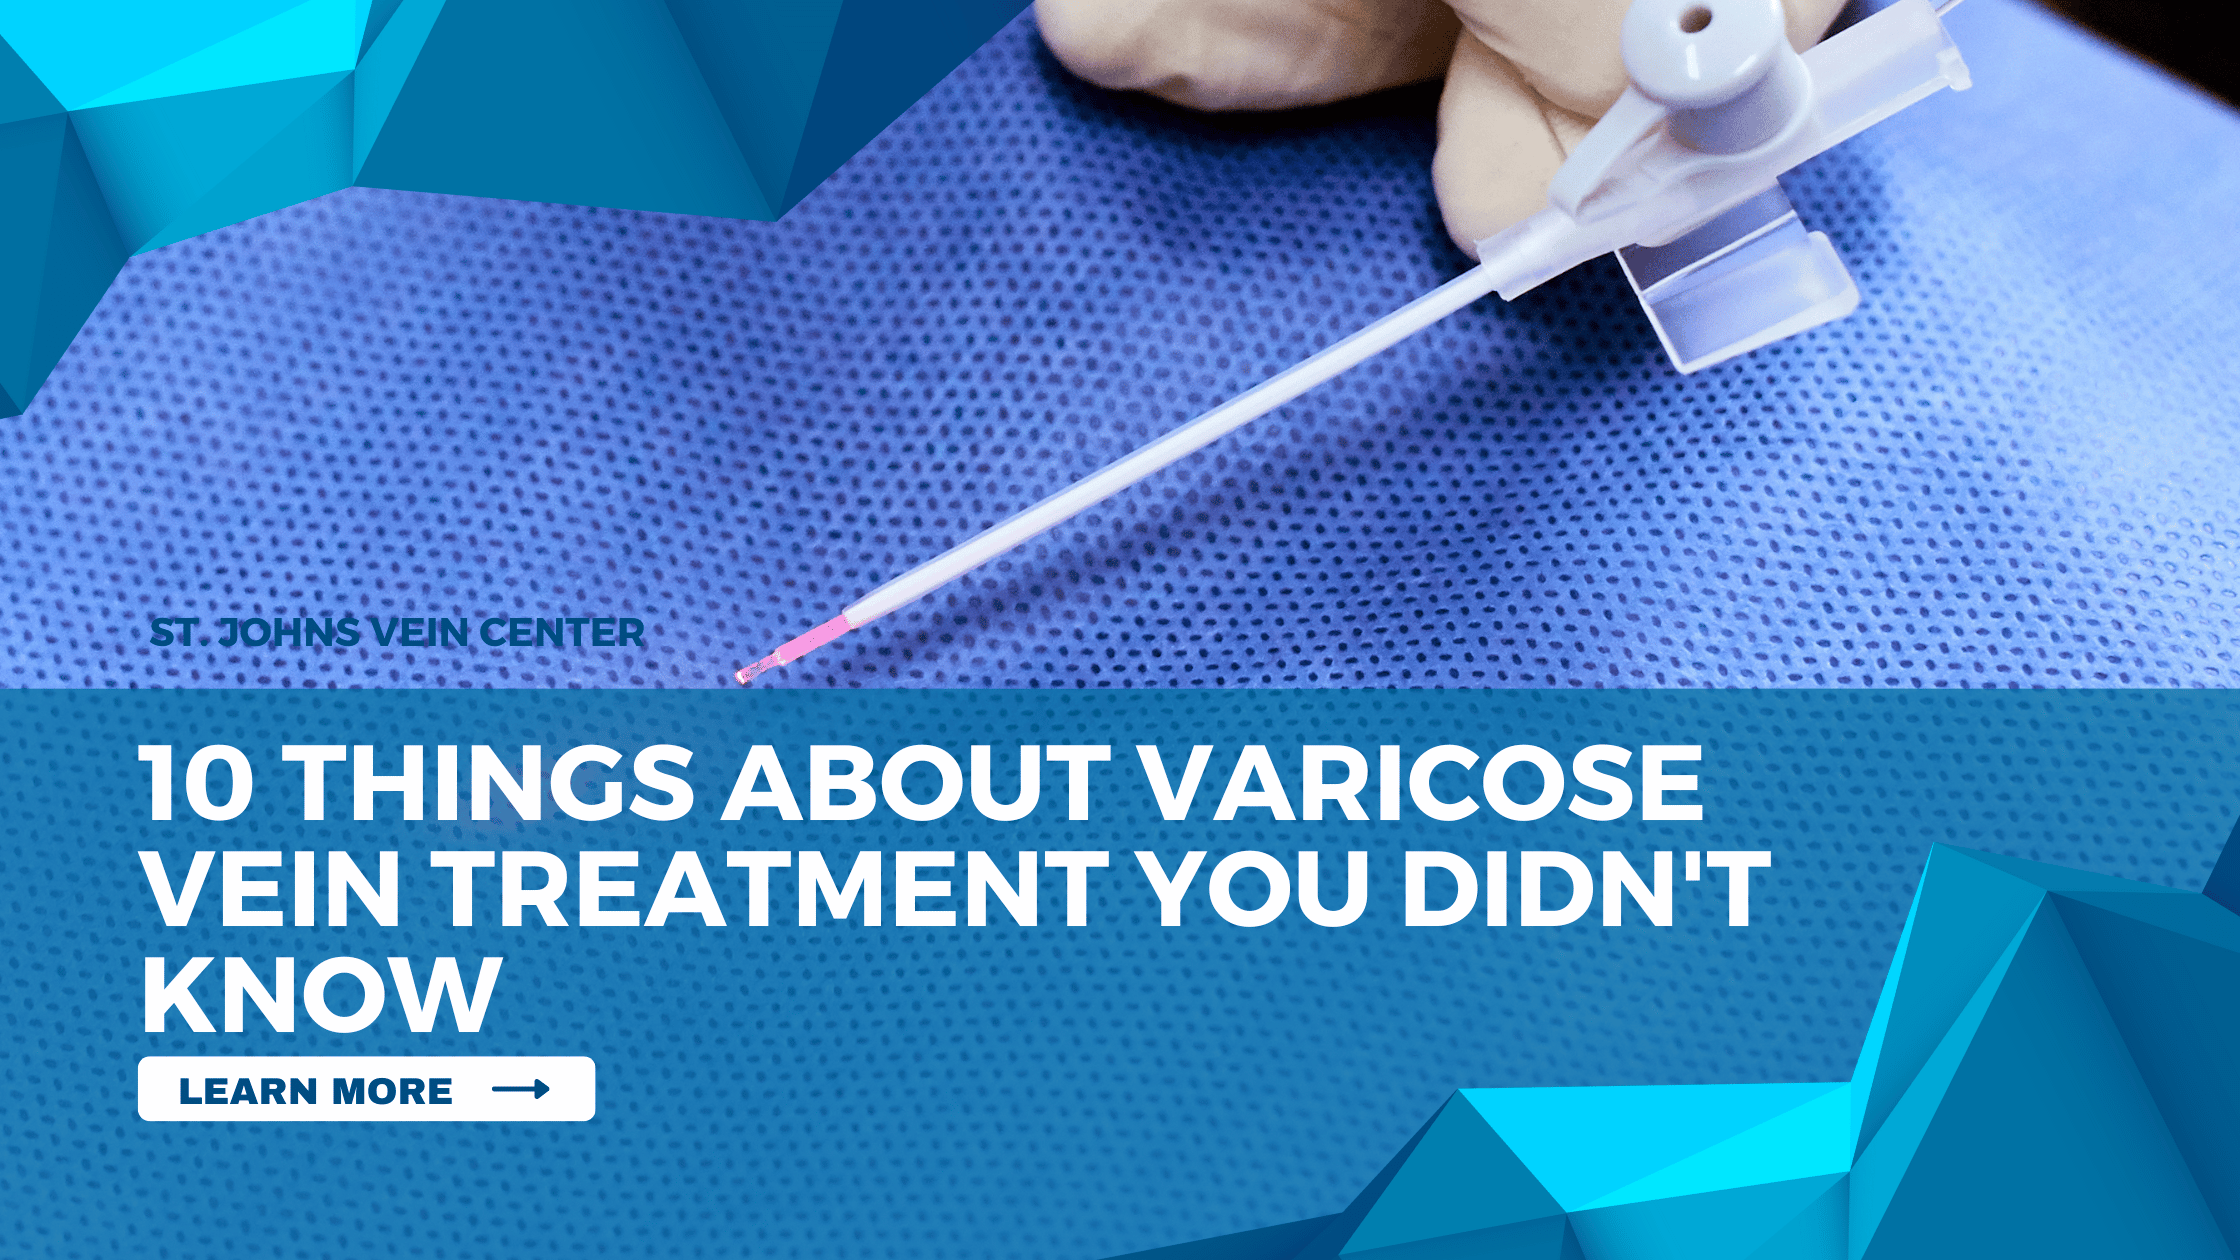 10 Things About Varicose Vein Treatment You Didn't Know